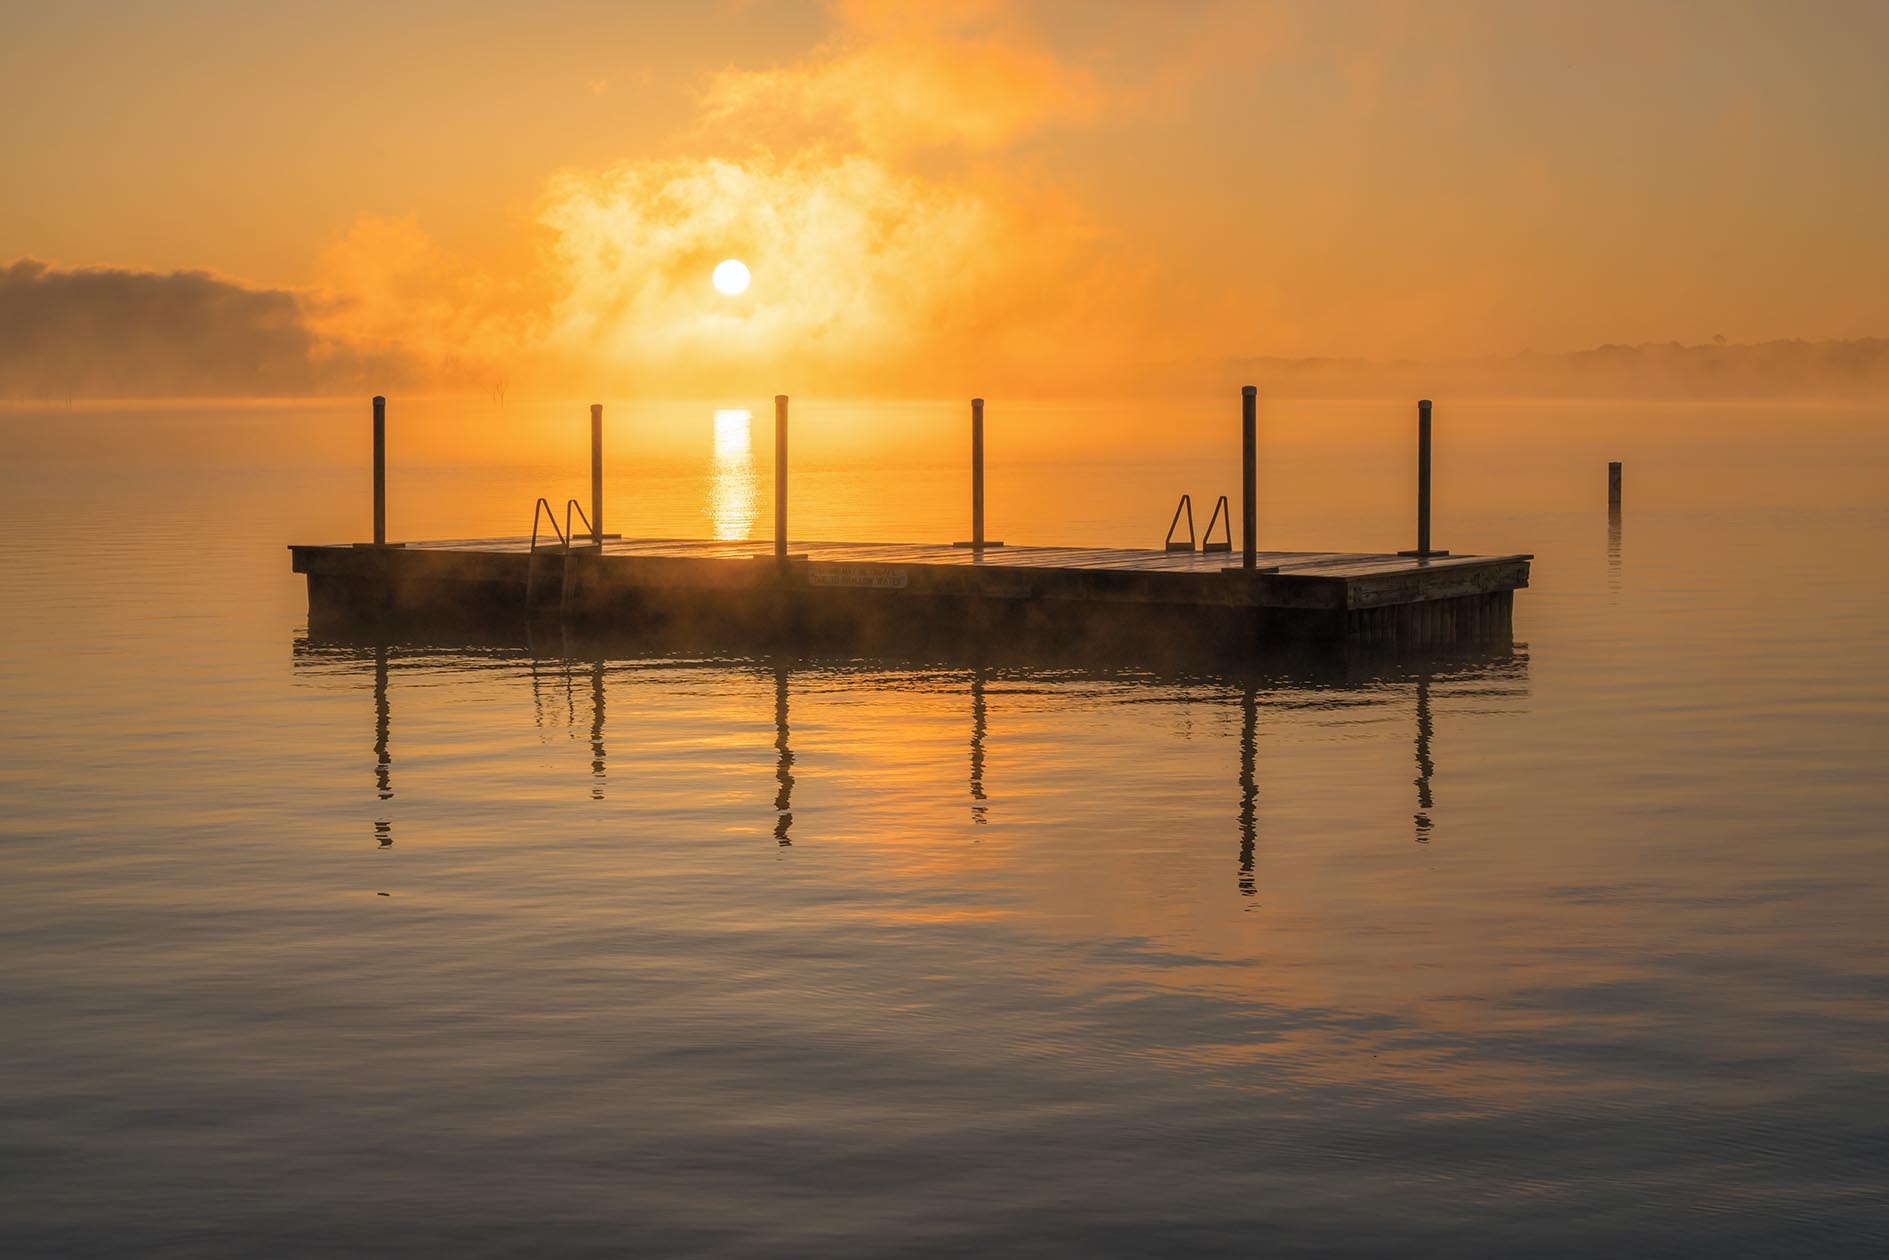 The sun rises over the misty water and a swimming platform out on a lake.